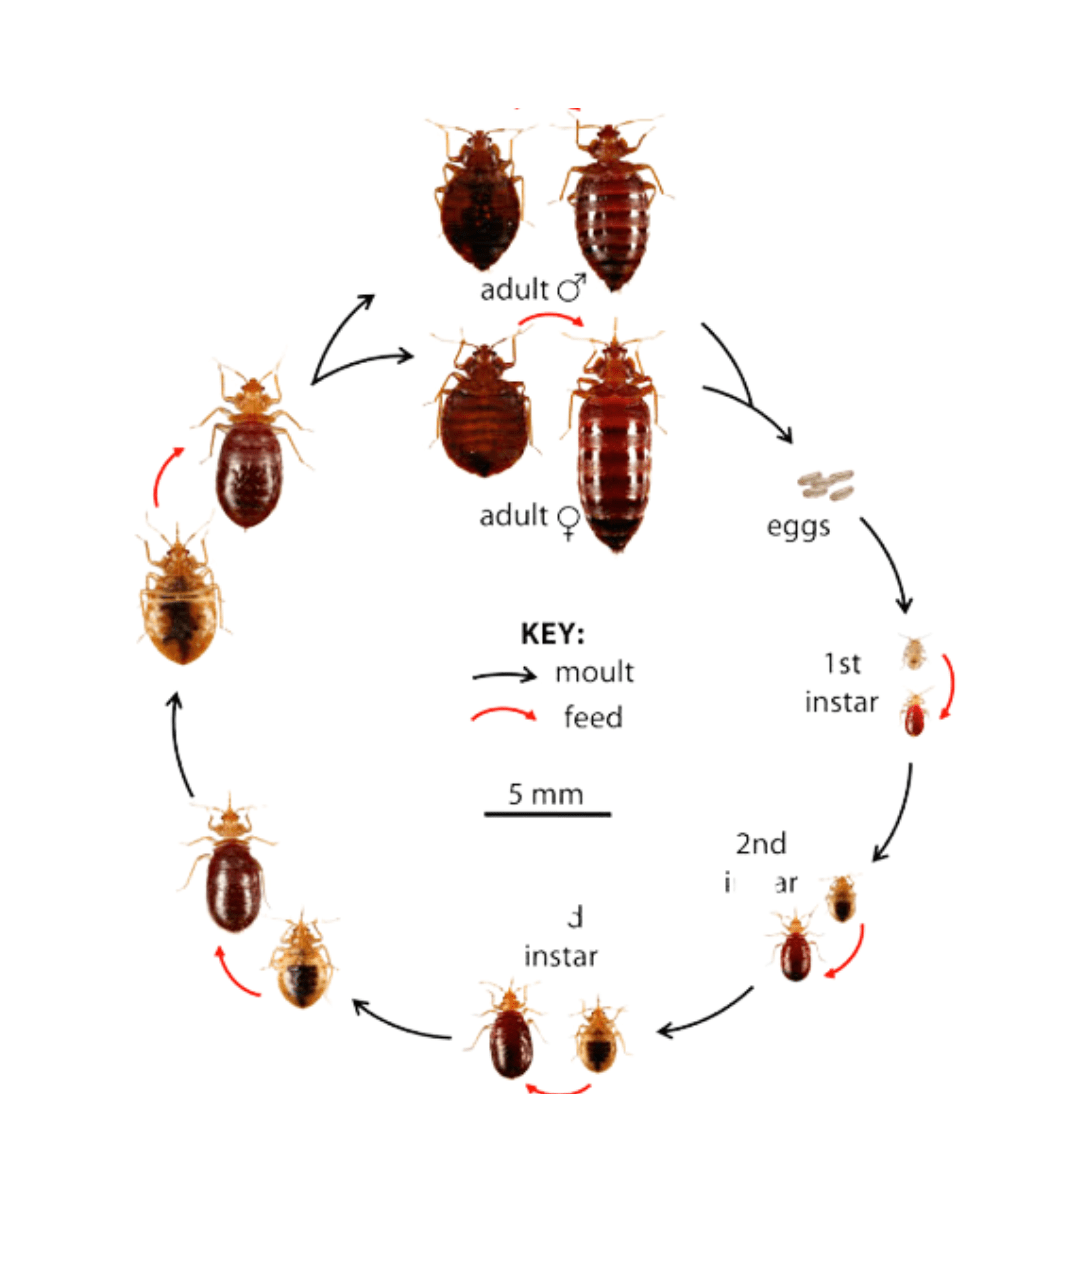 life cycle of bed bugs